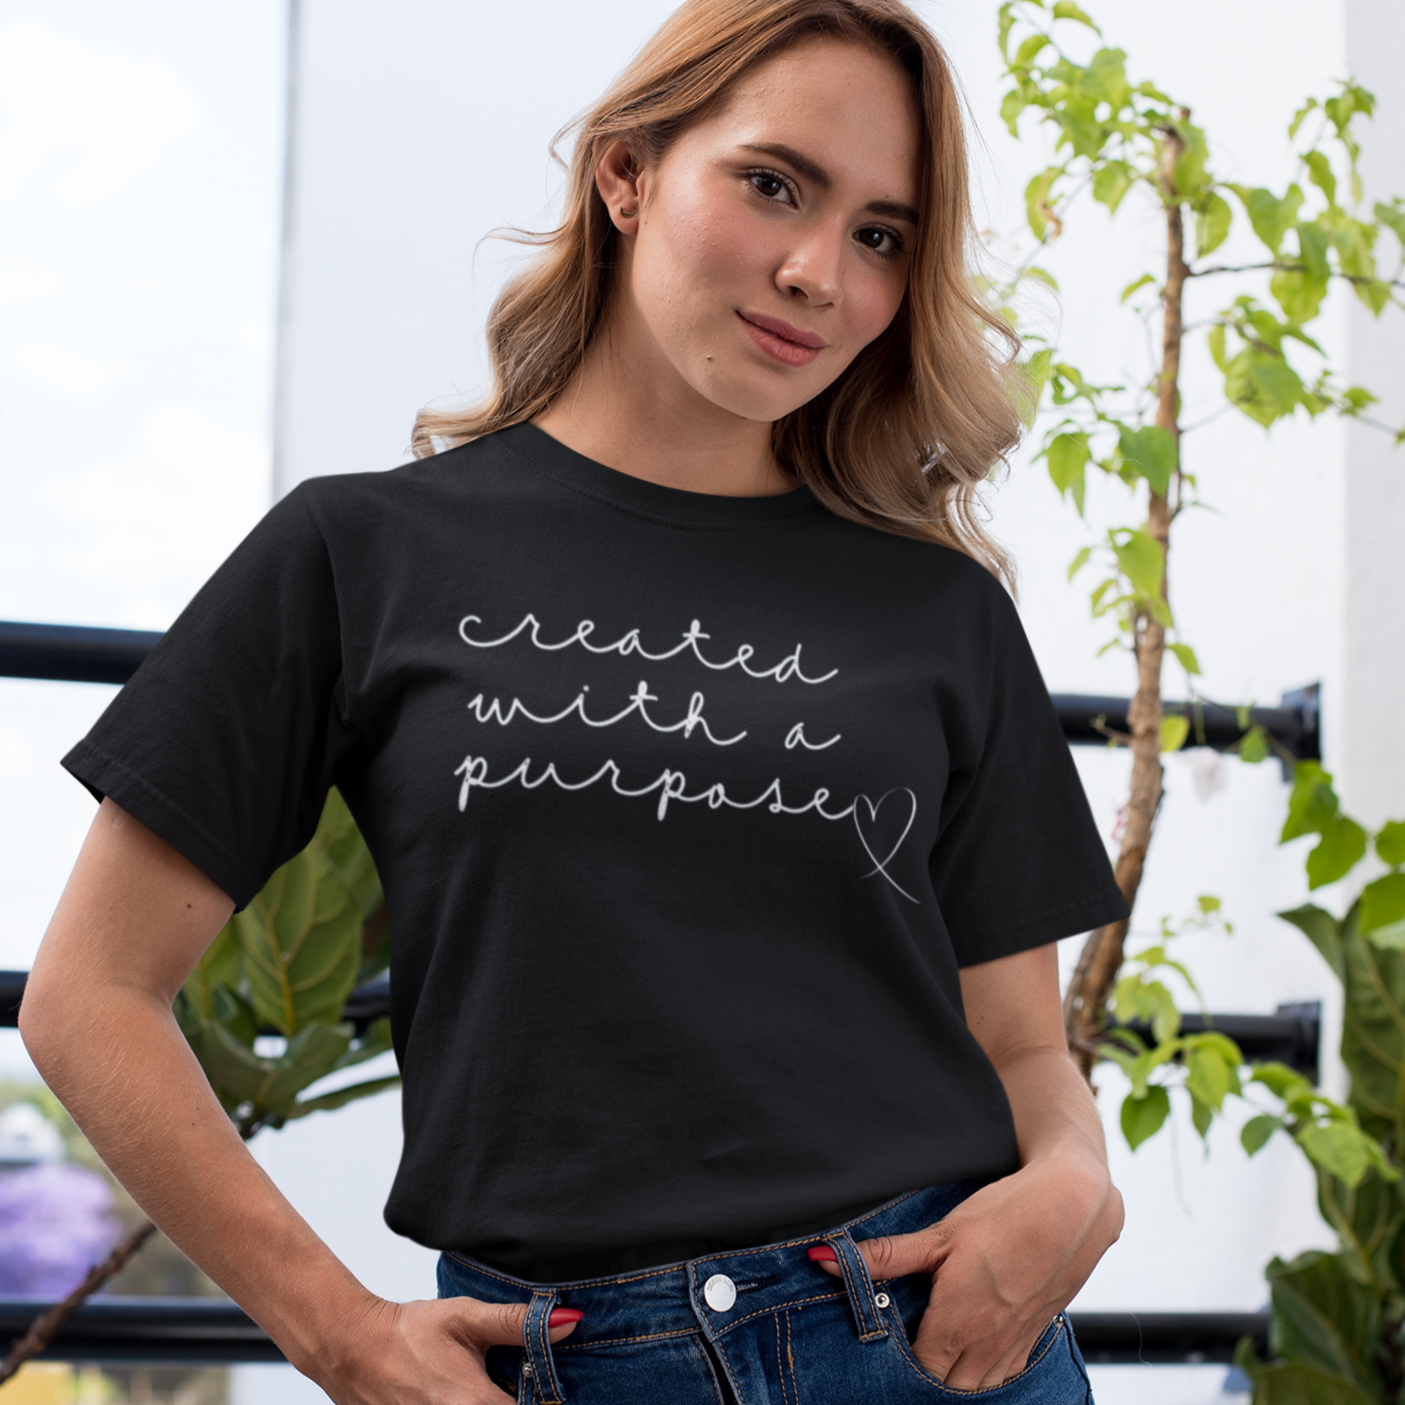 created-with-a-purpose-black-t-shirt-mockup-of-a-girl-with-a-coy-smile-by-a-balcony